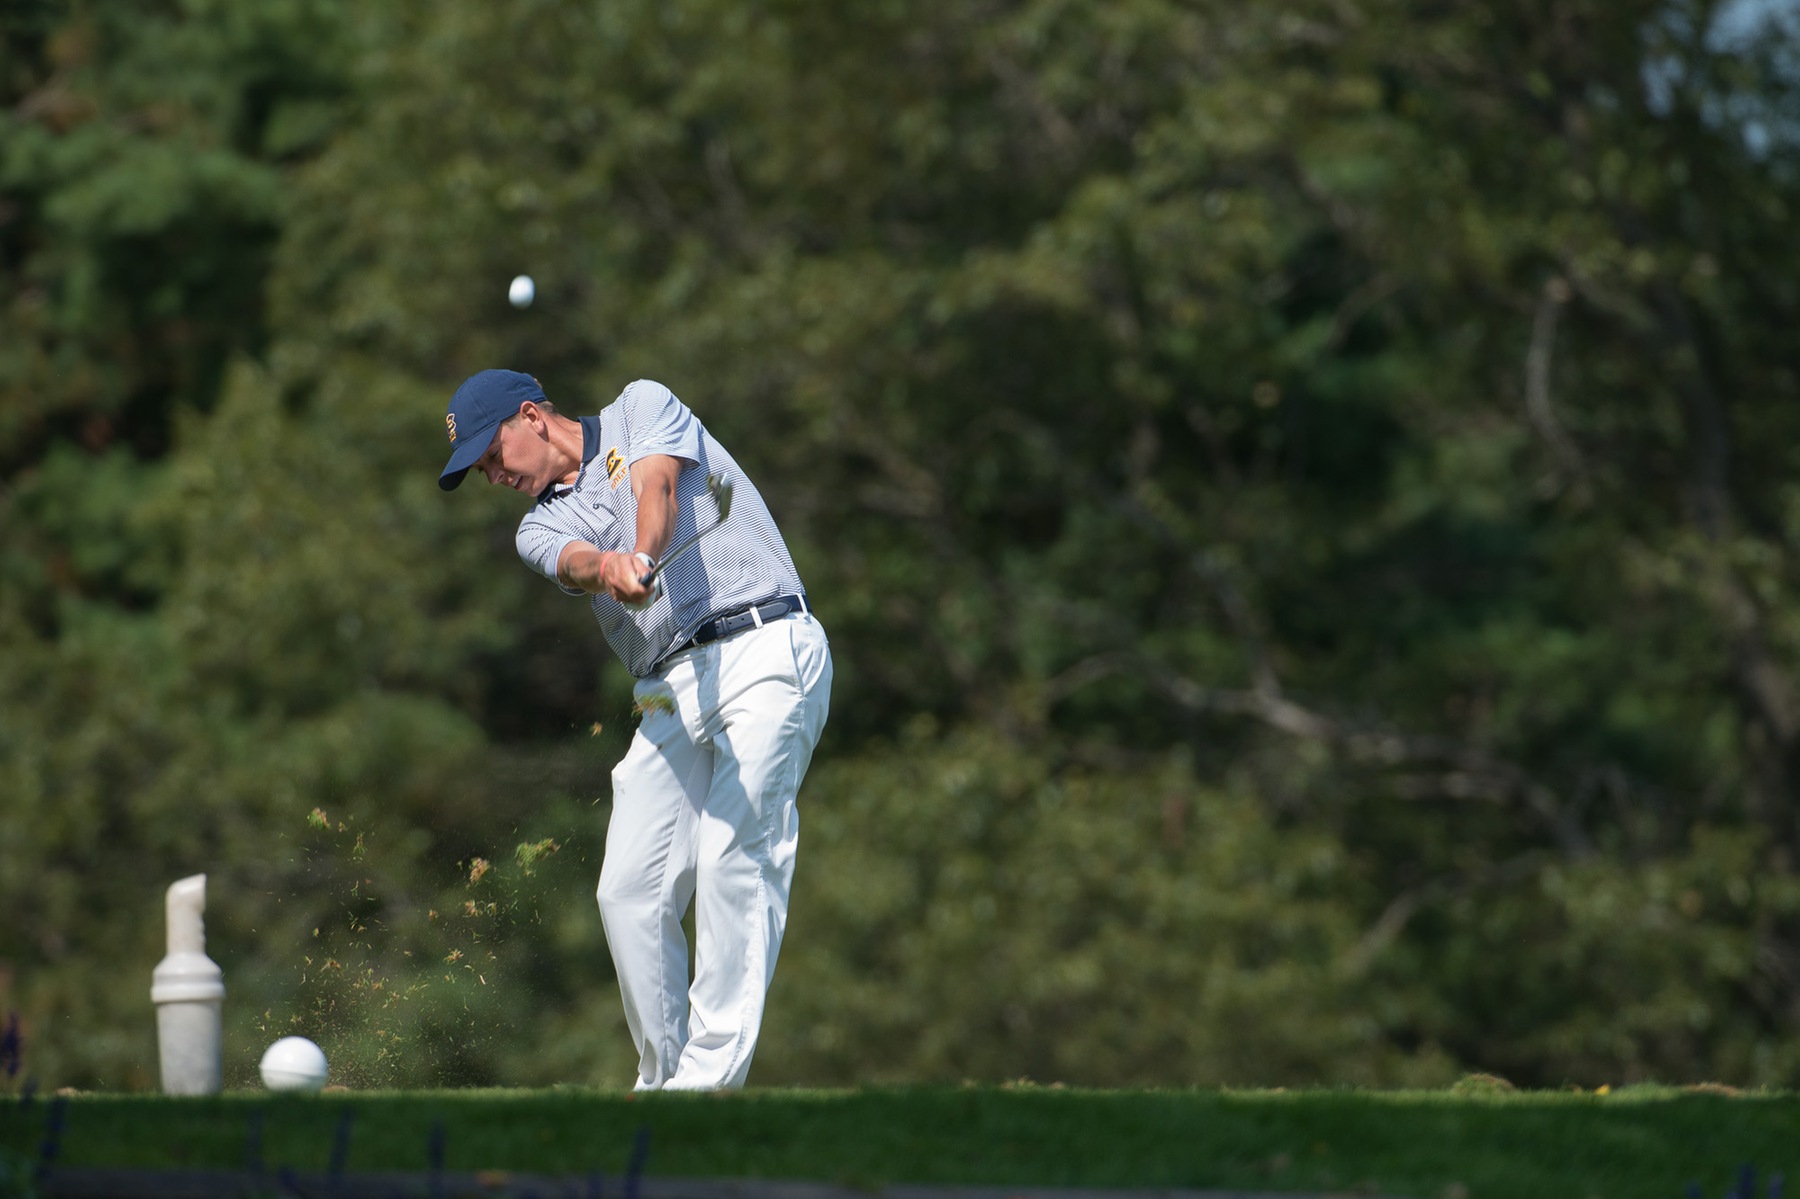 Men's Golf takes 2nd while Rogan earns medalist honors at Bobby Krig Invite